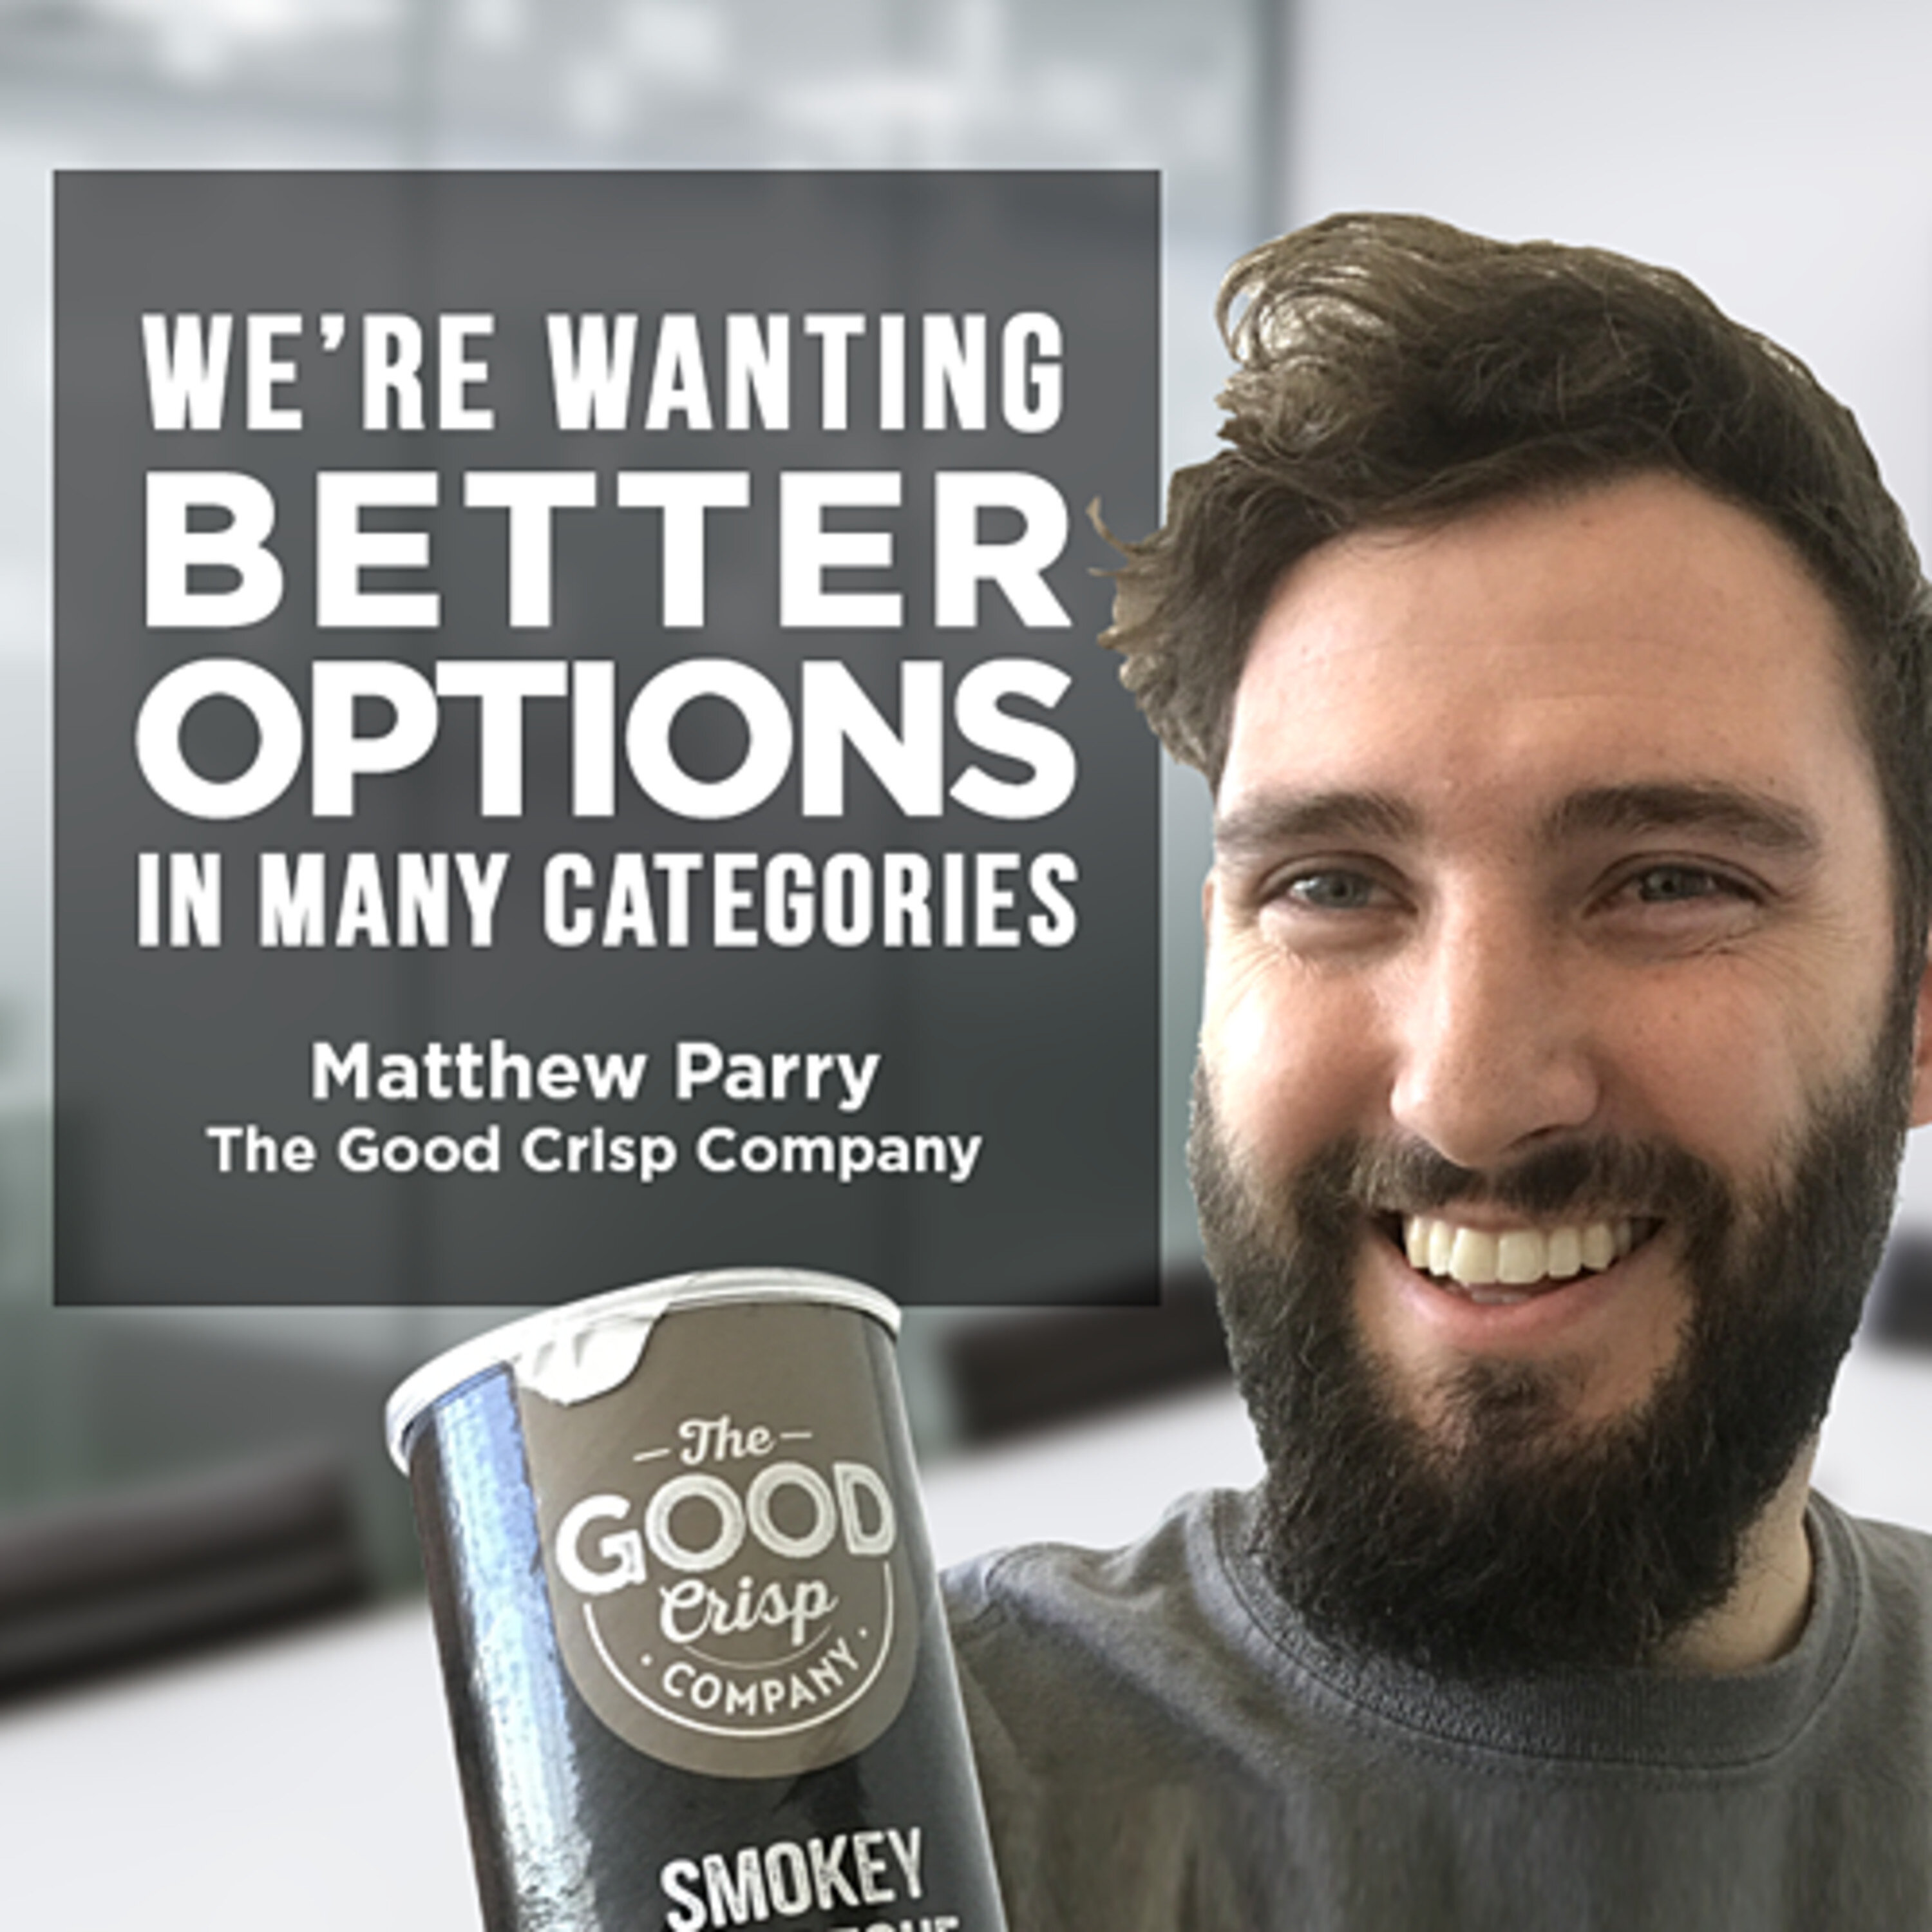 Look out Pringles, Matthew Parry of The Good Crisp Company is coming after you! | #405